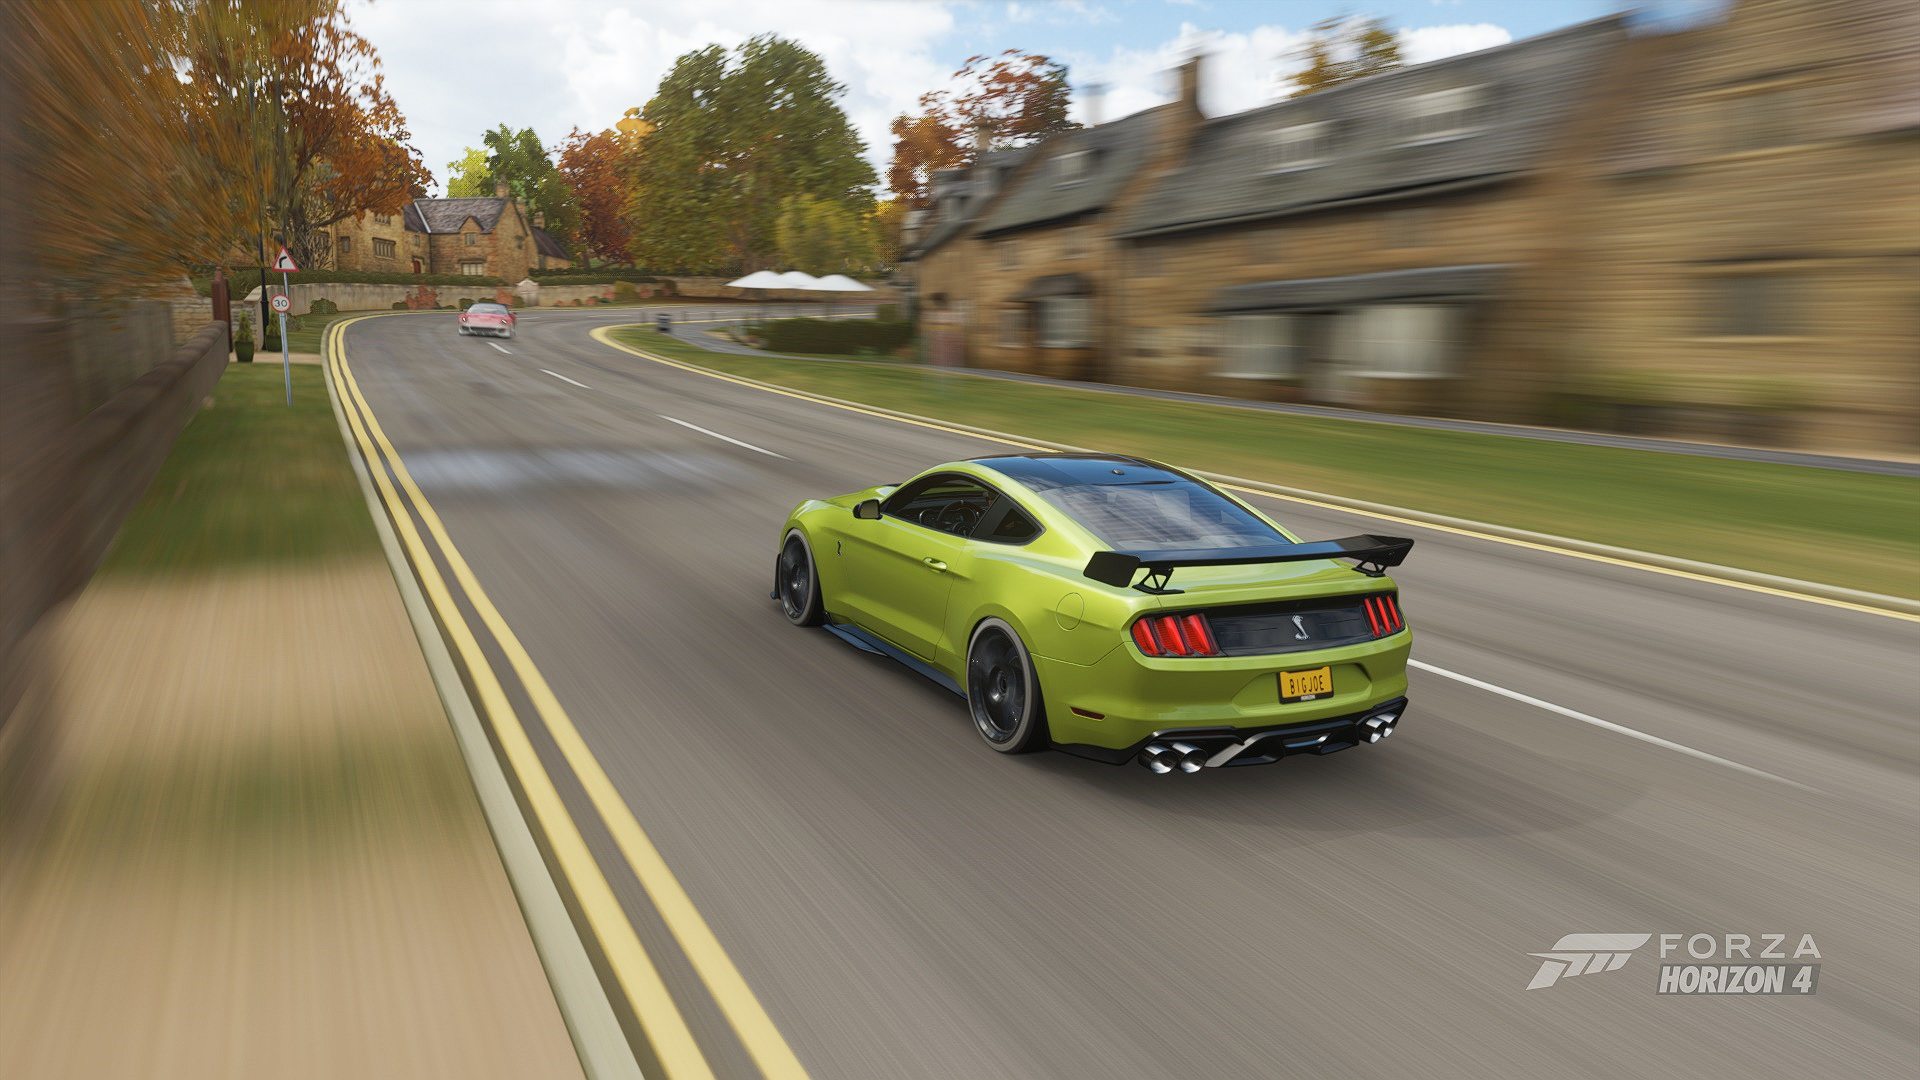 General 1920x1080 Forza Horizon 4 Forza Horizon Forza car CGI driving Ford Mustang Shelby road video games logo rear view licence plates blurred blurry background